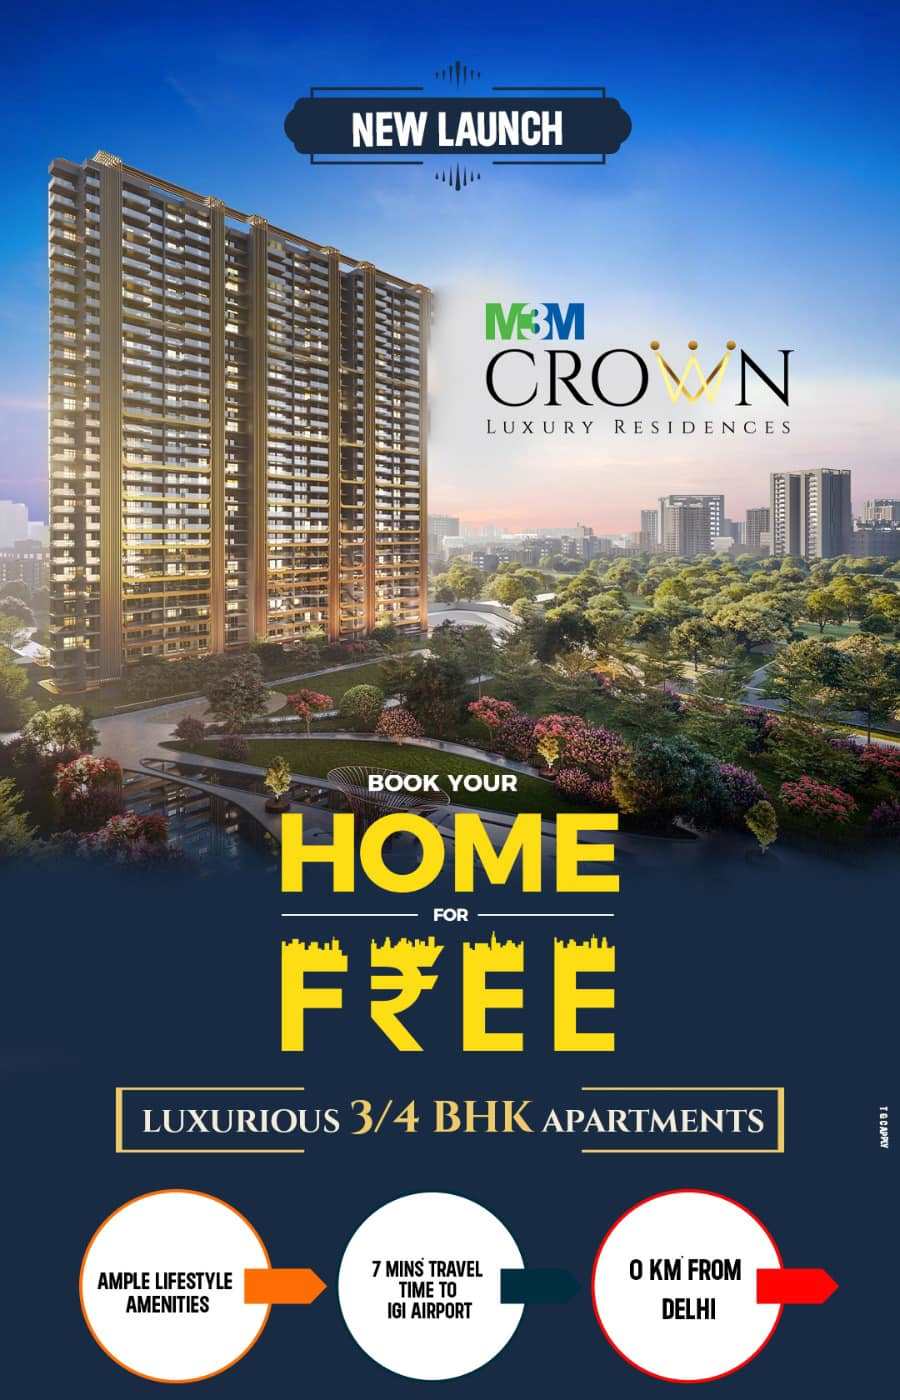 New launch at M3M Crown in Dwarka Expressway, Gurgaon Update